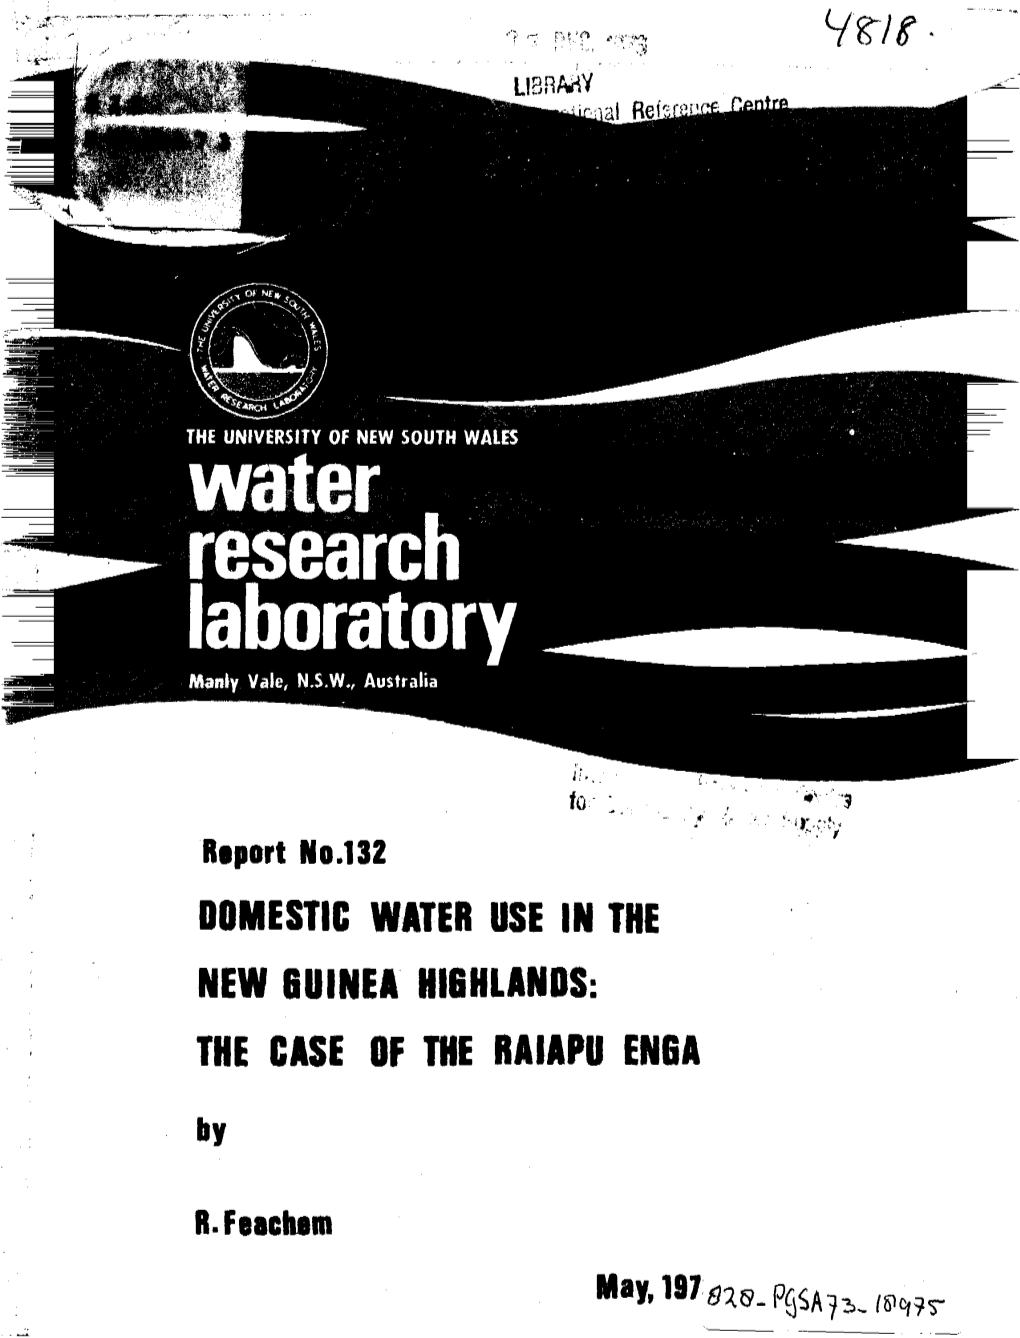 DOMESTIC WATER USE in the NEW 8UINEA HI6HLAN0S: the CASE of the RAIAPU ENGA By